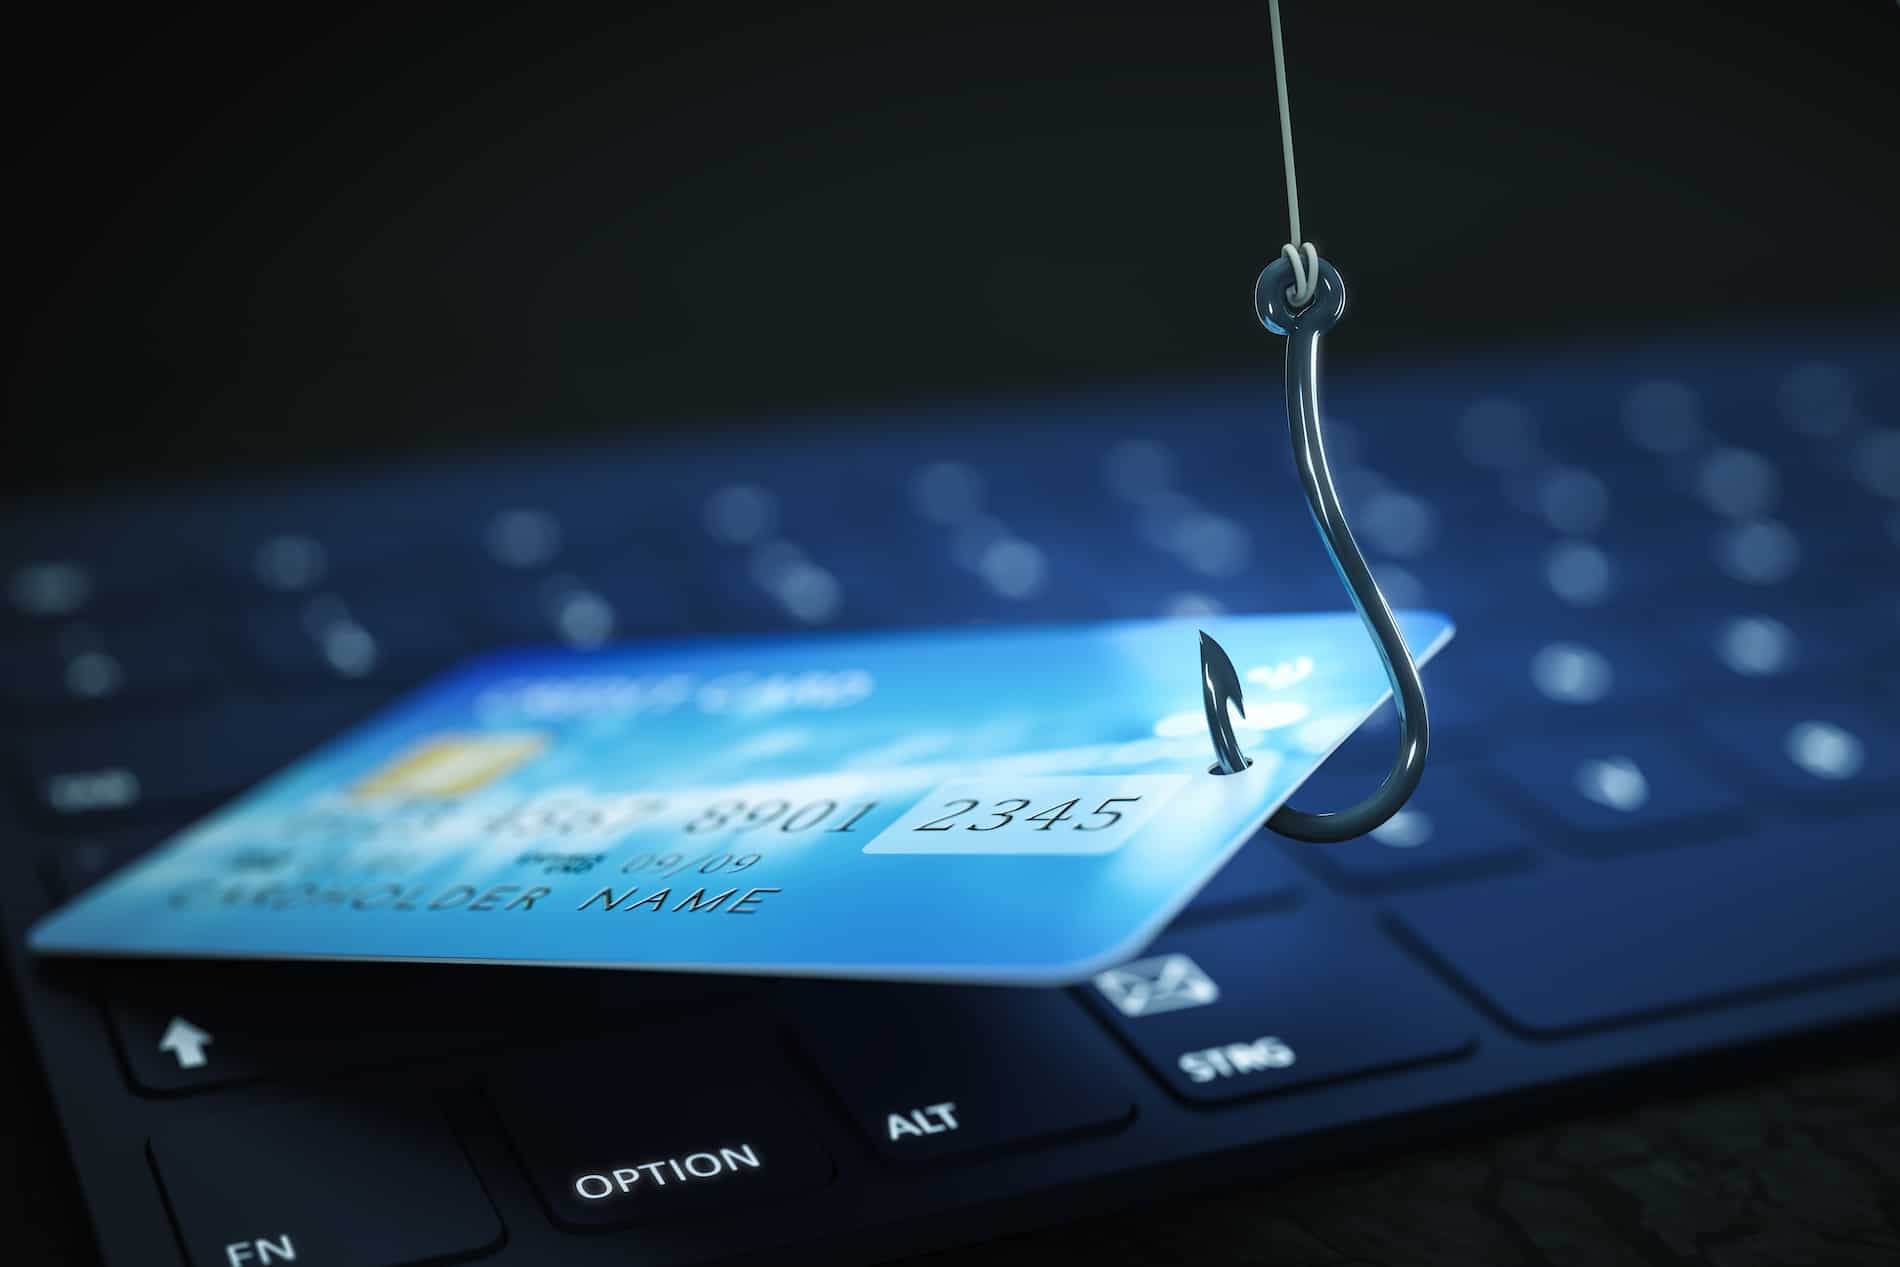 phishing credit card data with keyboard and hook symbol 3d illustration